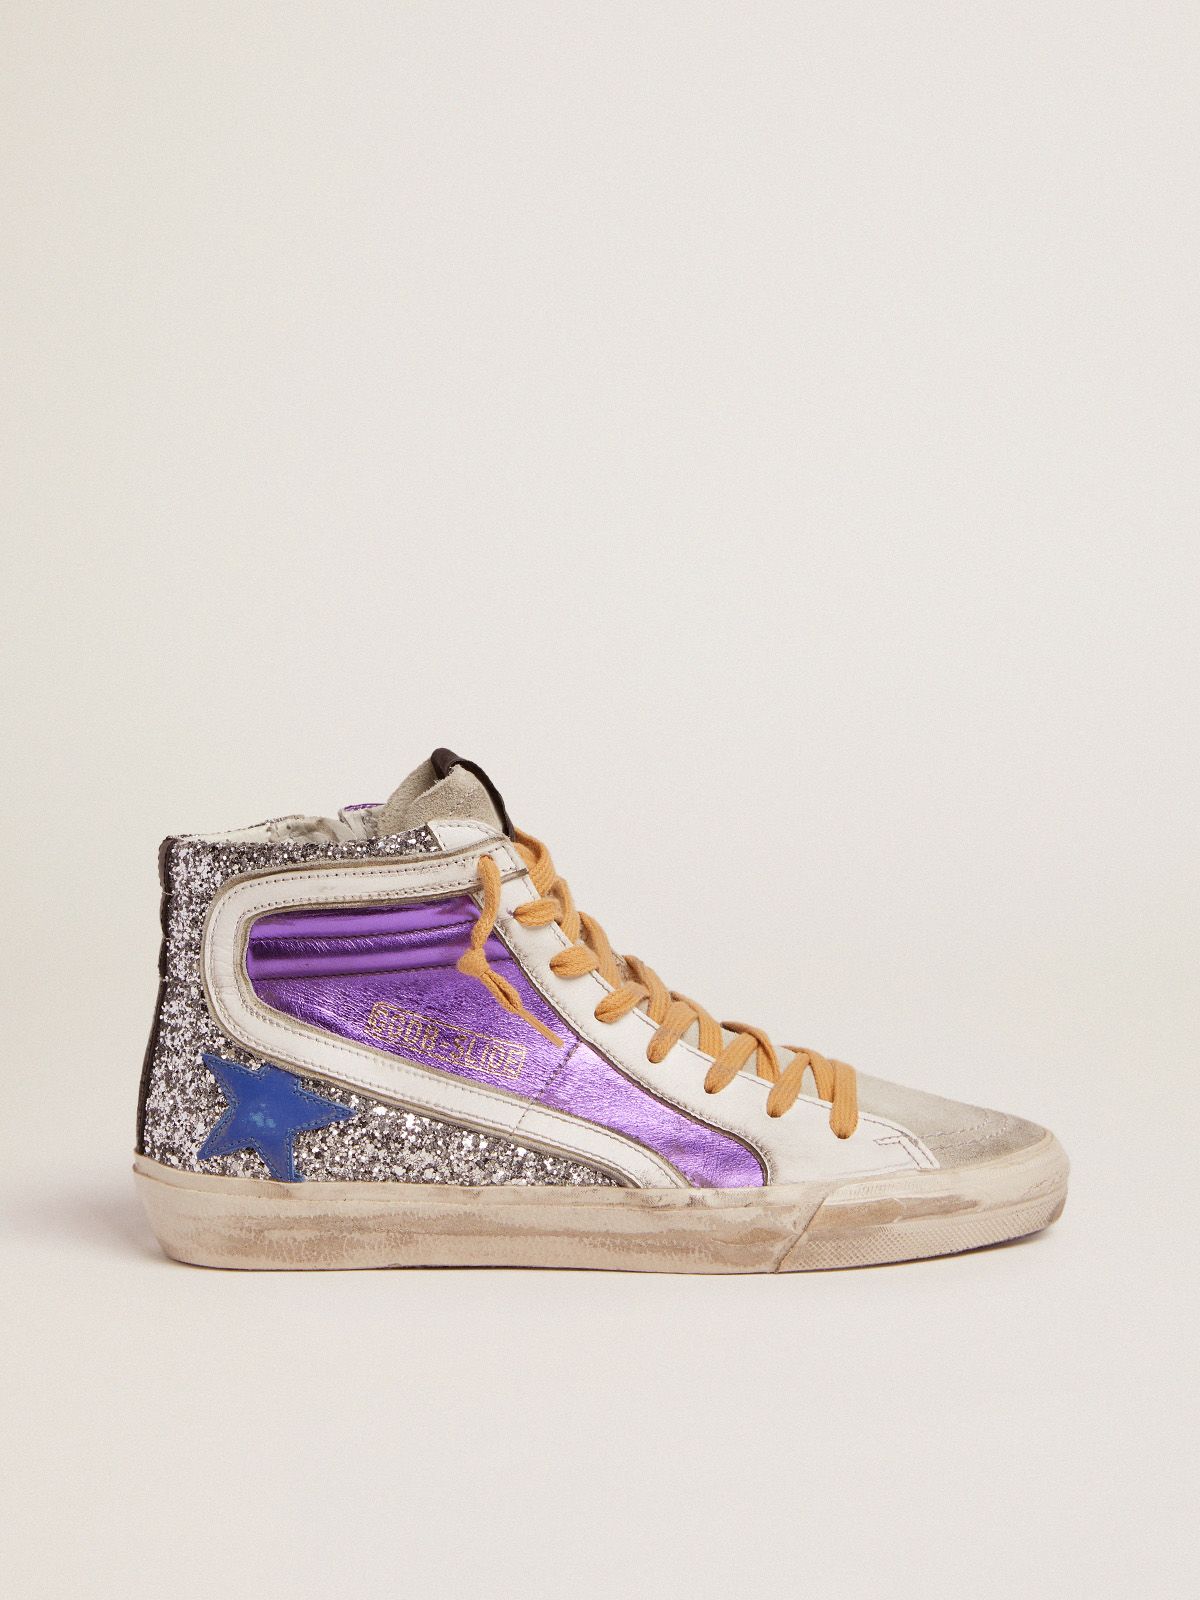 golden goose laminated silver sneakers upper purple Slide leather and glitter with